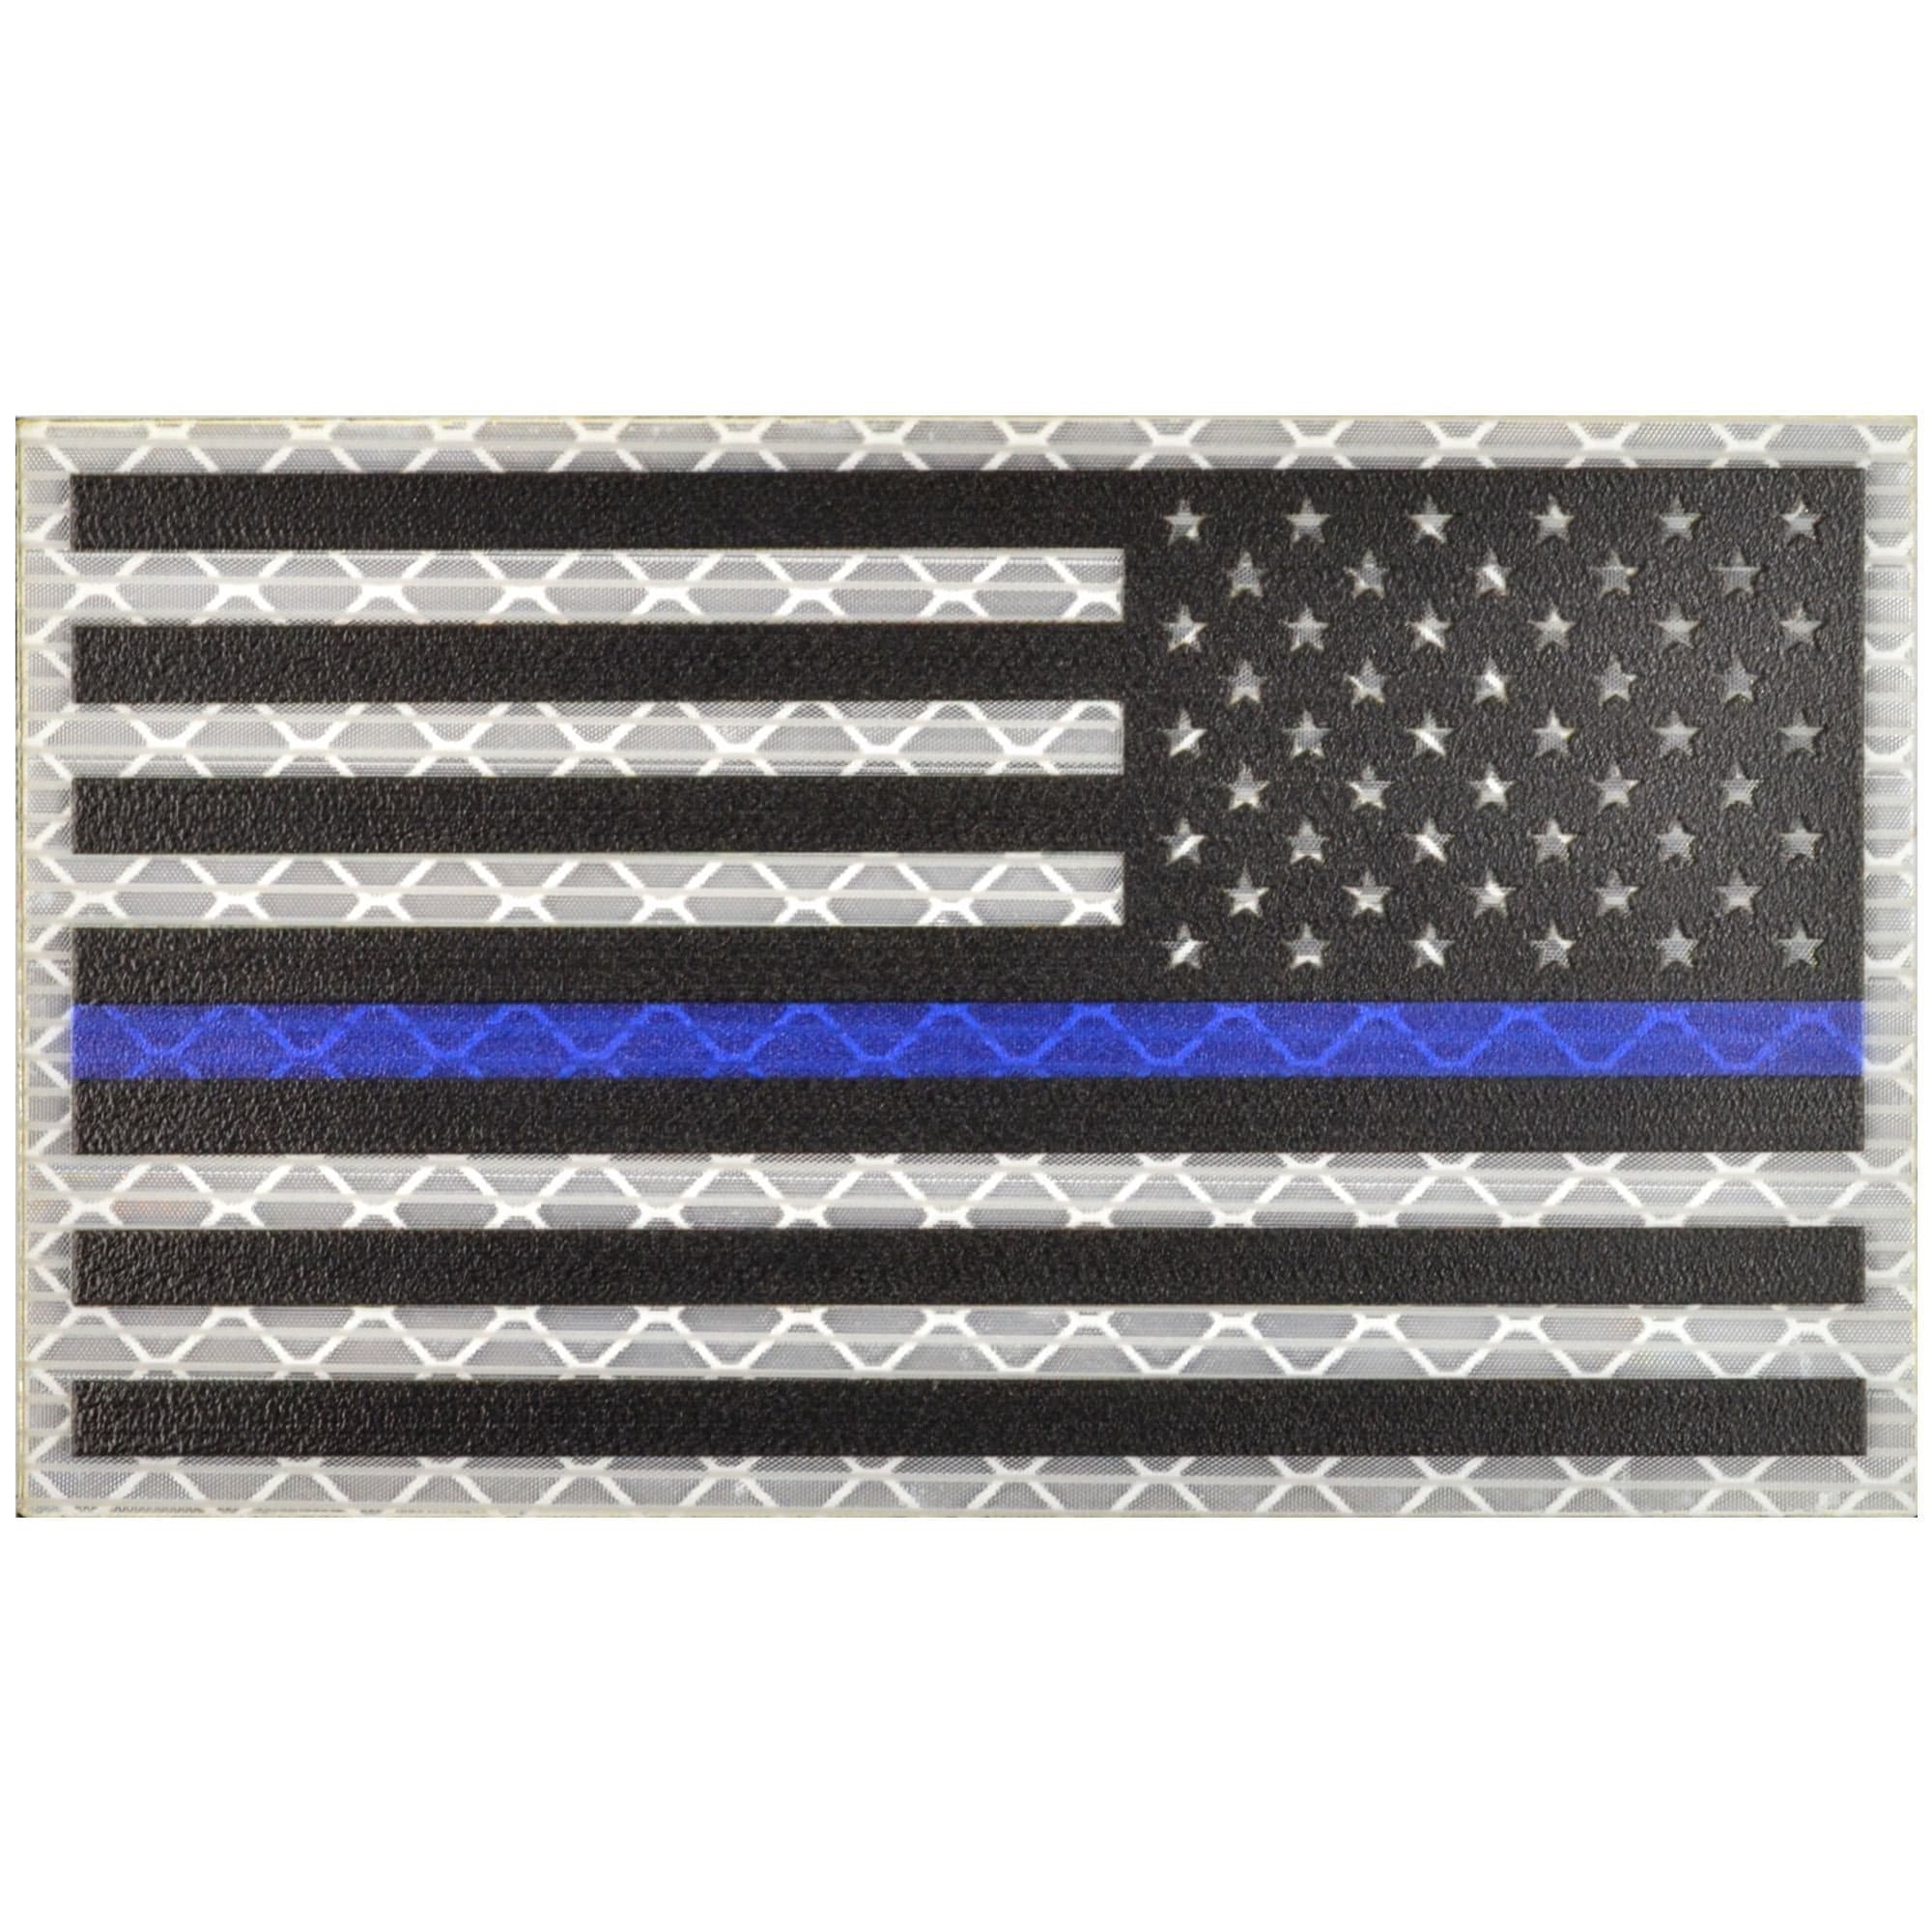 Tactical Gear Junkie Patches Reverse Reflective Printed Thin Blue Line USA Flag - 2x3.5 Patch